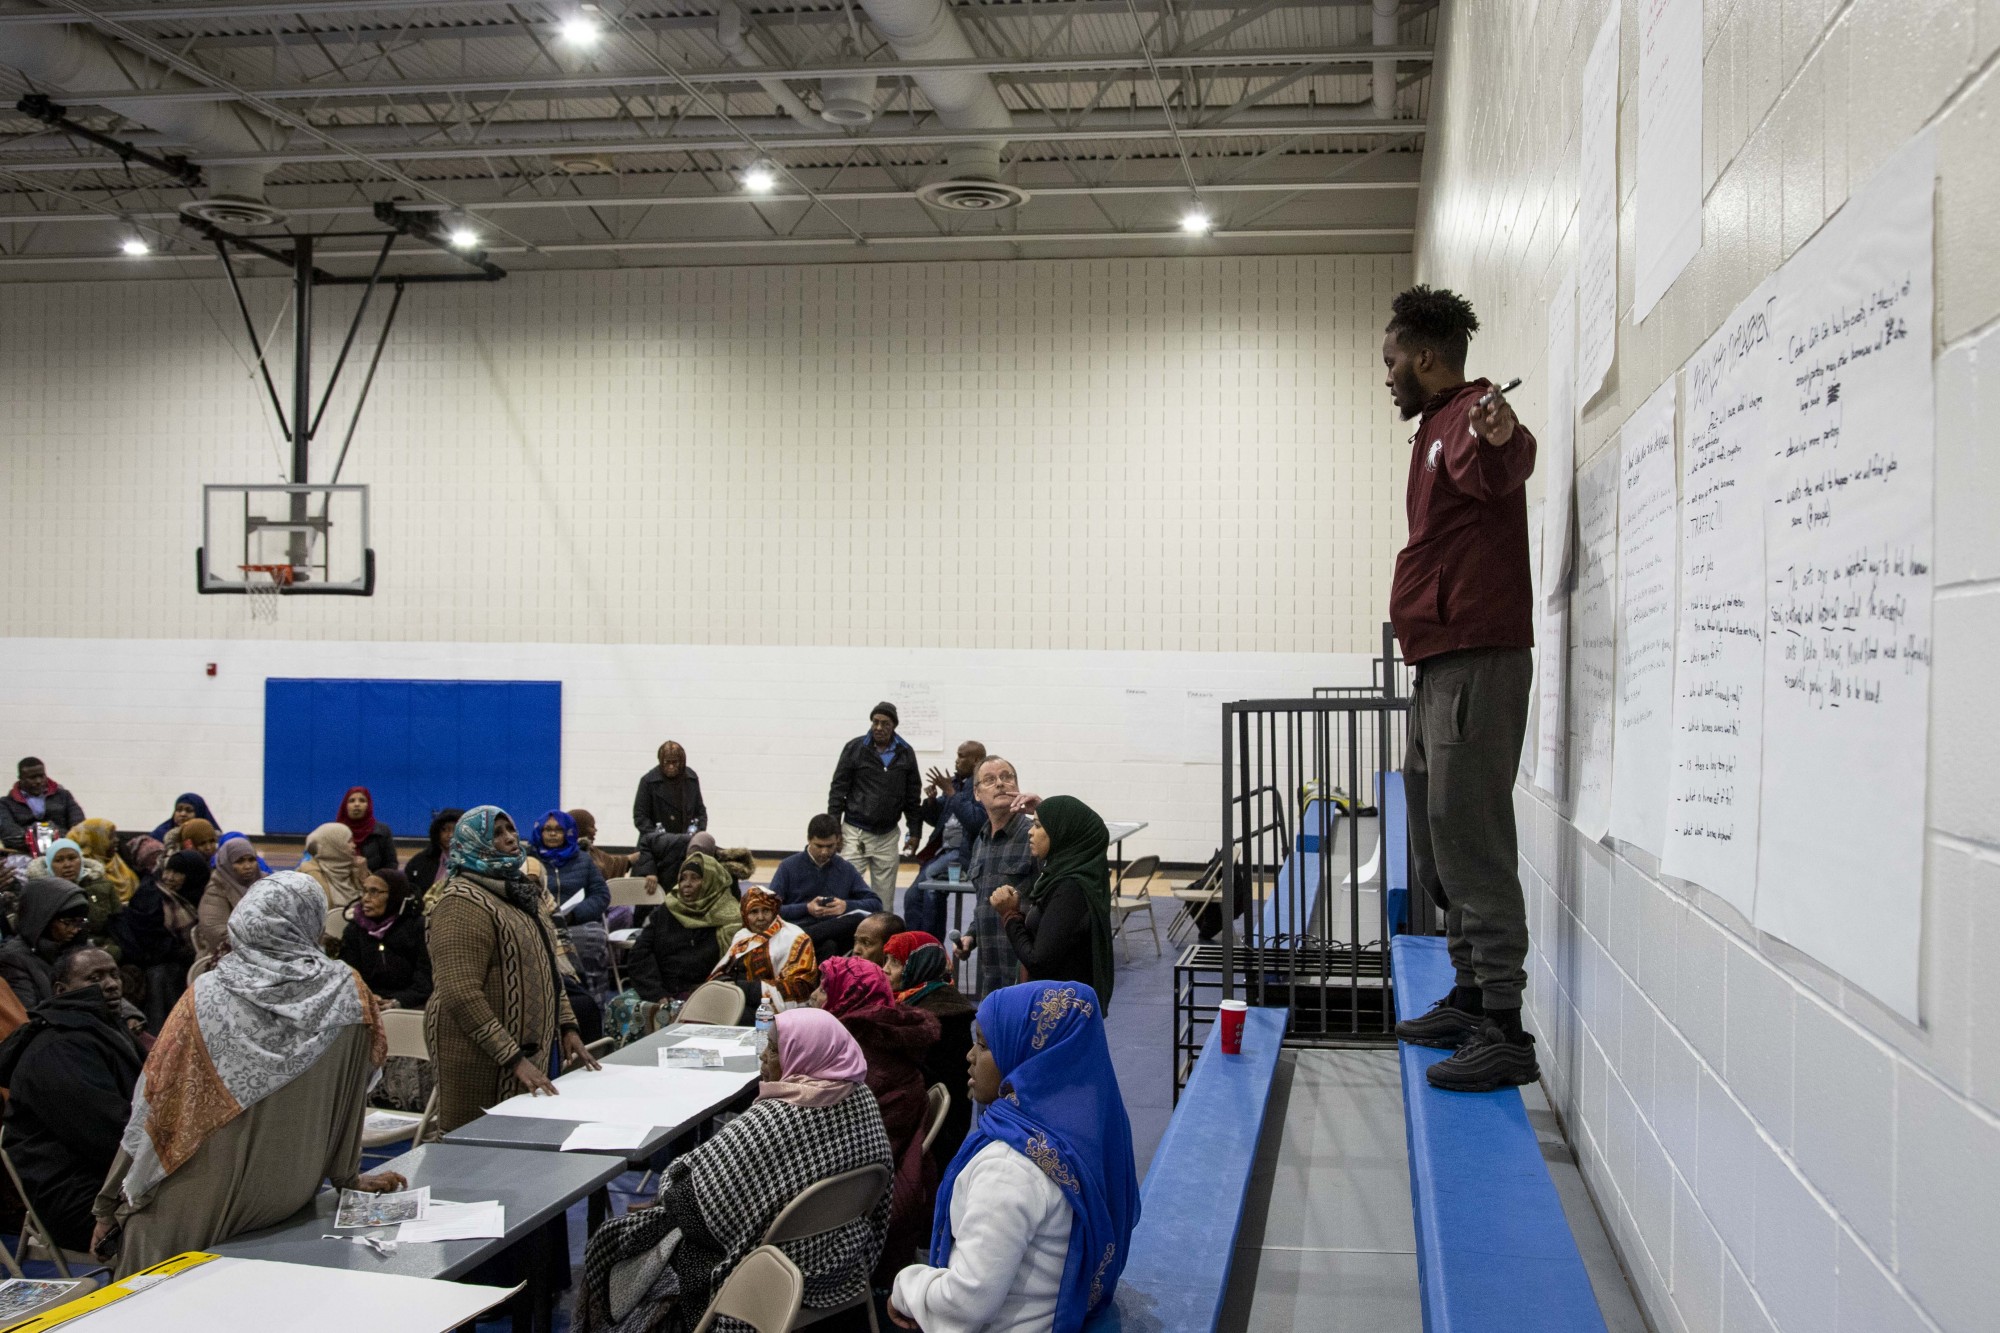 Mohamed Salad, a student at Augsburg University who sits on the board of the Neighborhood Revitalization Program, hosts a listening session regarding the city’s Africa Village public marketplace on Thursday, Nov. 21. 